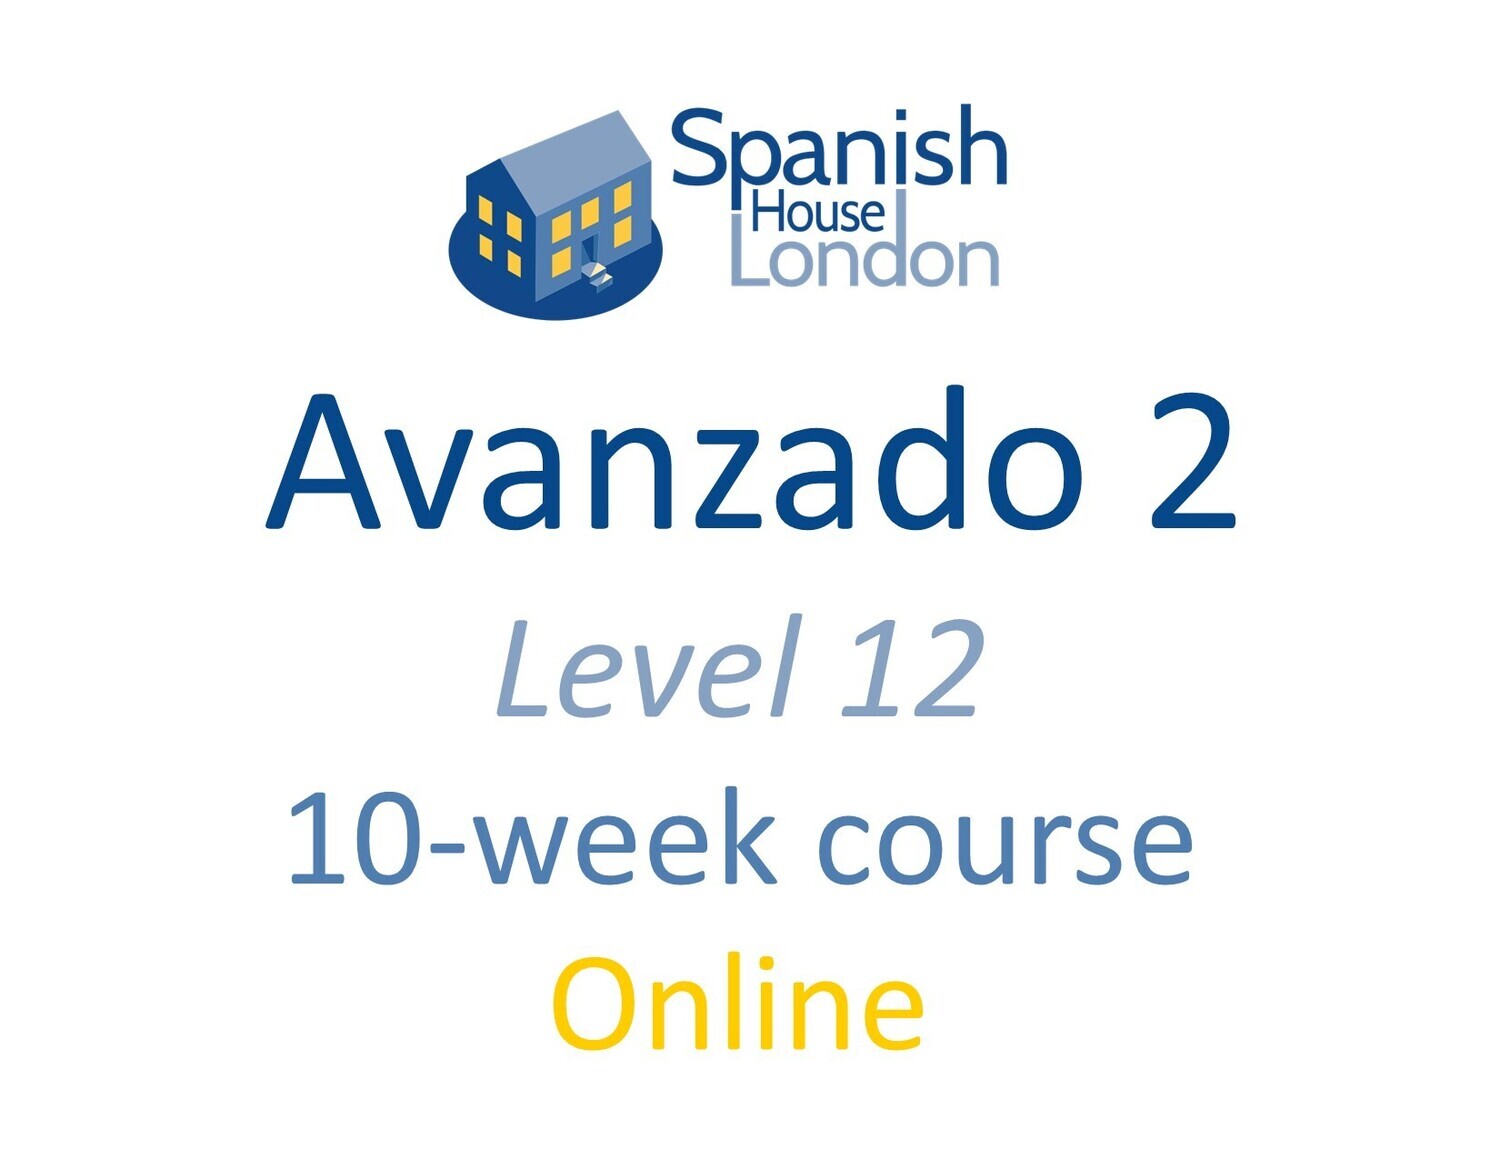 Avanzado 2 Course starting on 10th January at 7.30pm